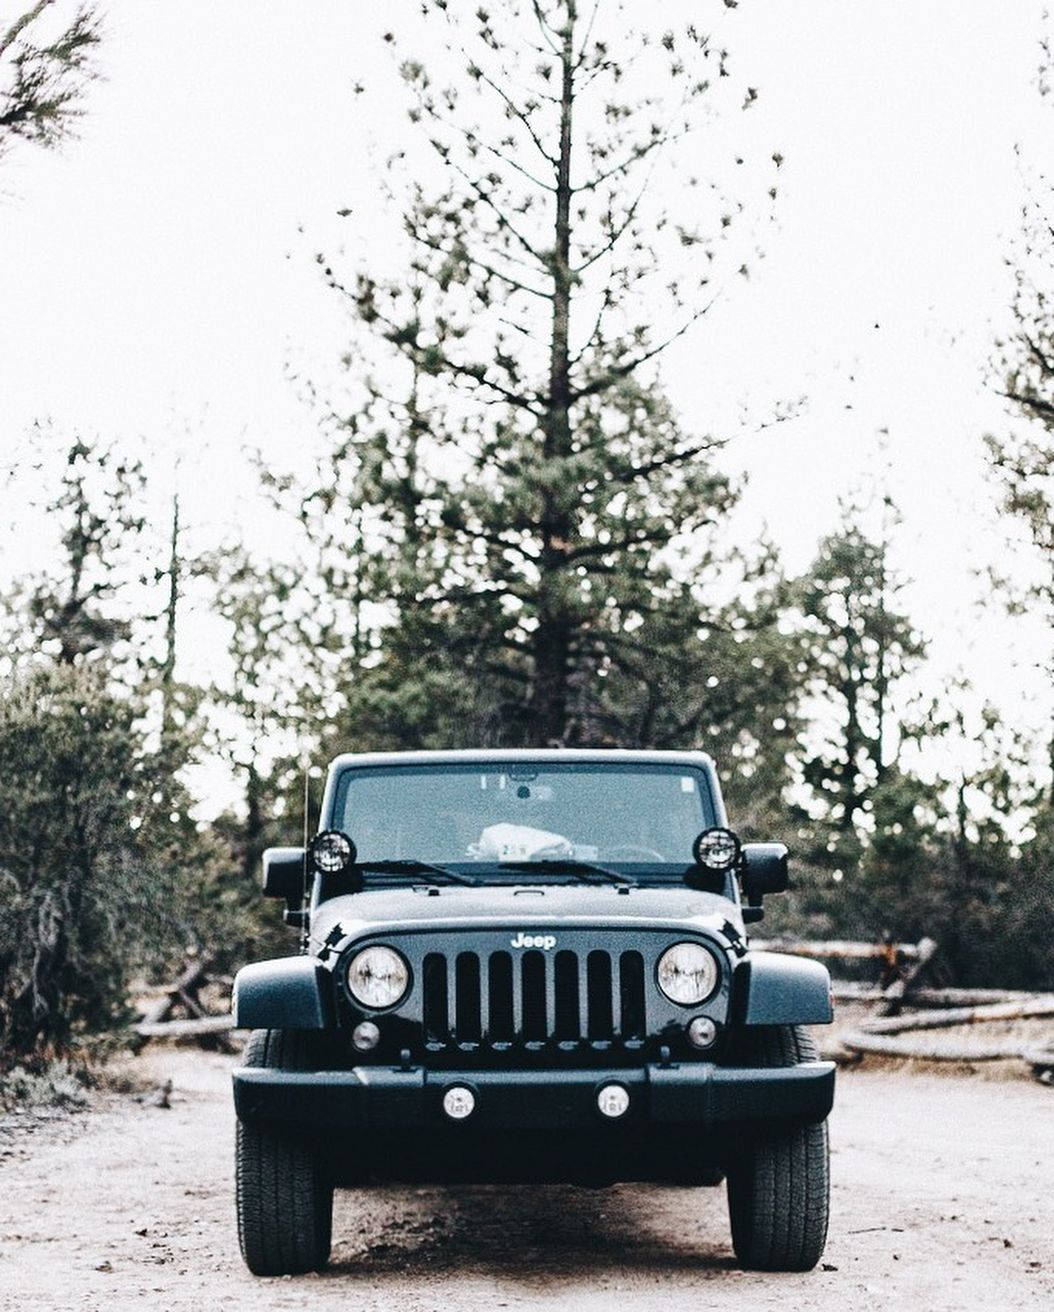 Black Jeep Wrangler With Tall Trees Background